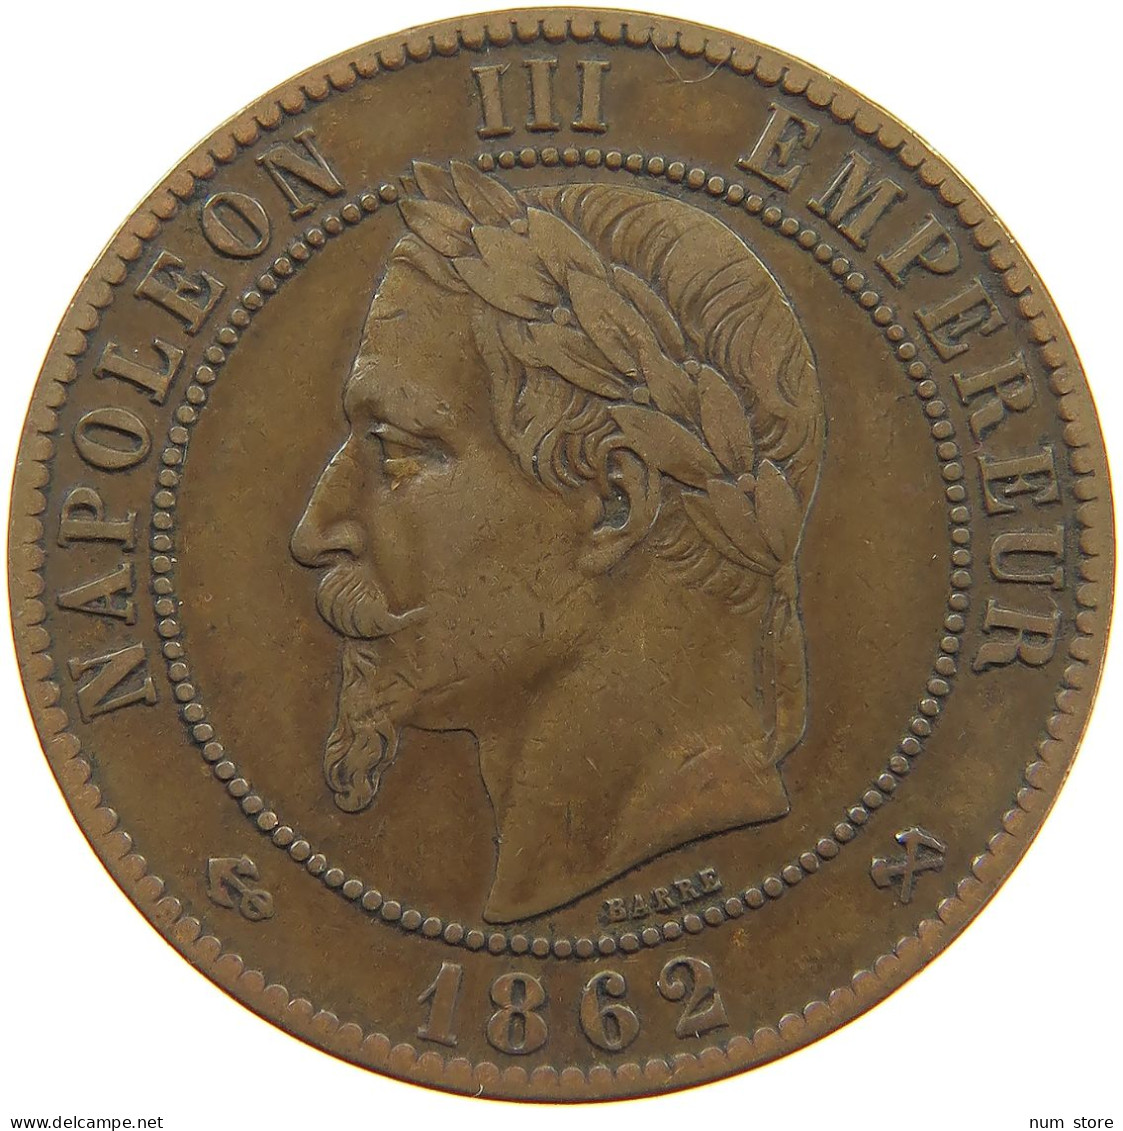 FRANCE 10 CENTIMES 1862 K Napoleon III. (1852-1870) #a041 0351 - 10 Centimes